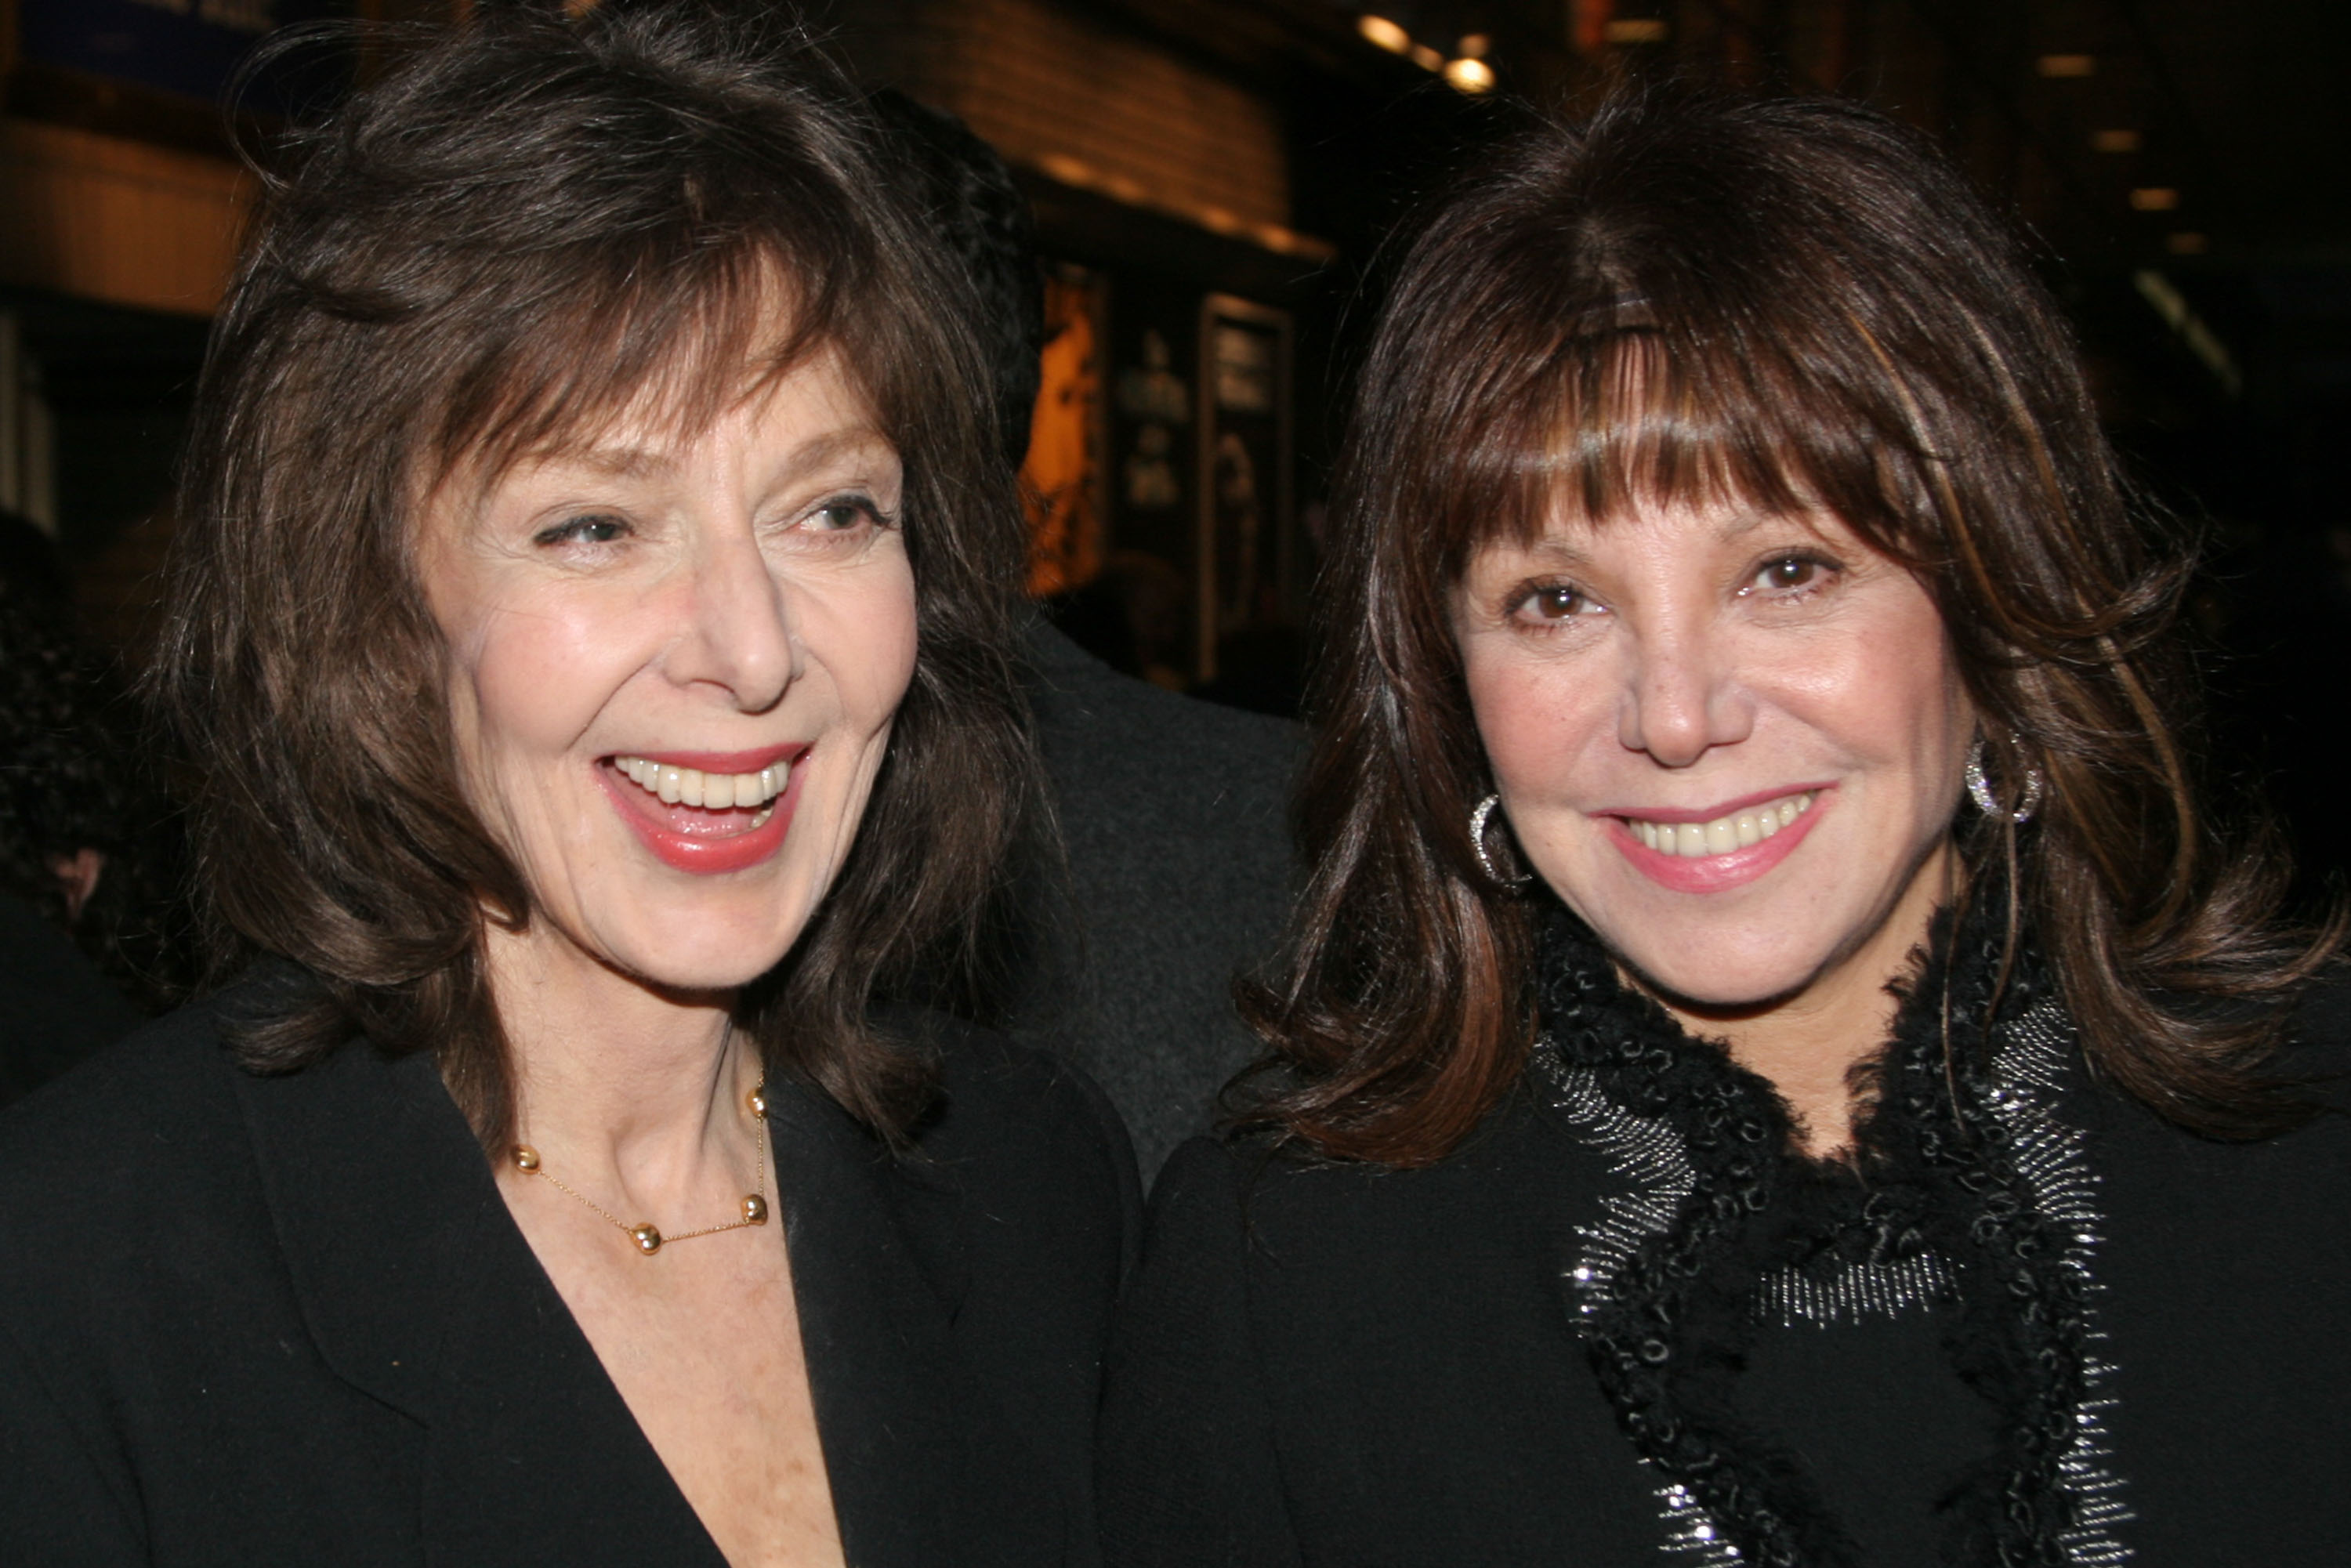 Elaine May and Marlo Thomas at Monty Python's "Spamalot" Broadway Opening Night, The Shubert Theater, New York City | Source: Getty Images